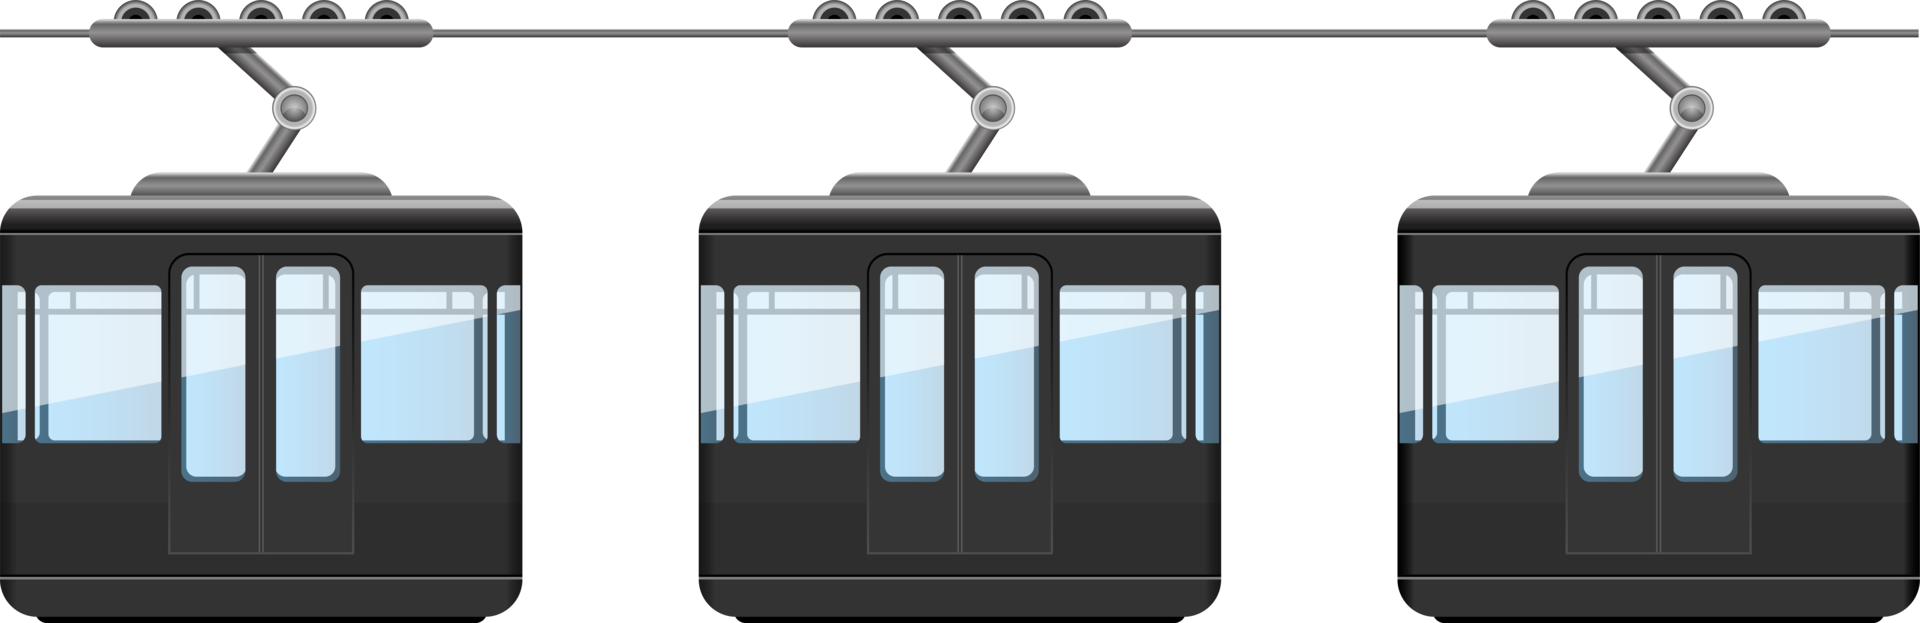 Cableway funicular clipart design illustration png